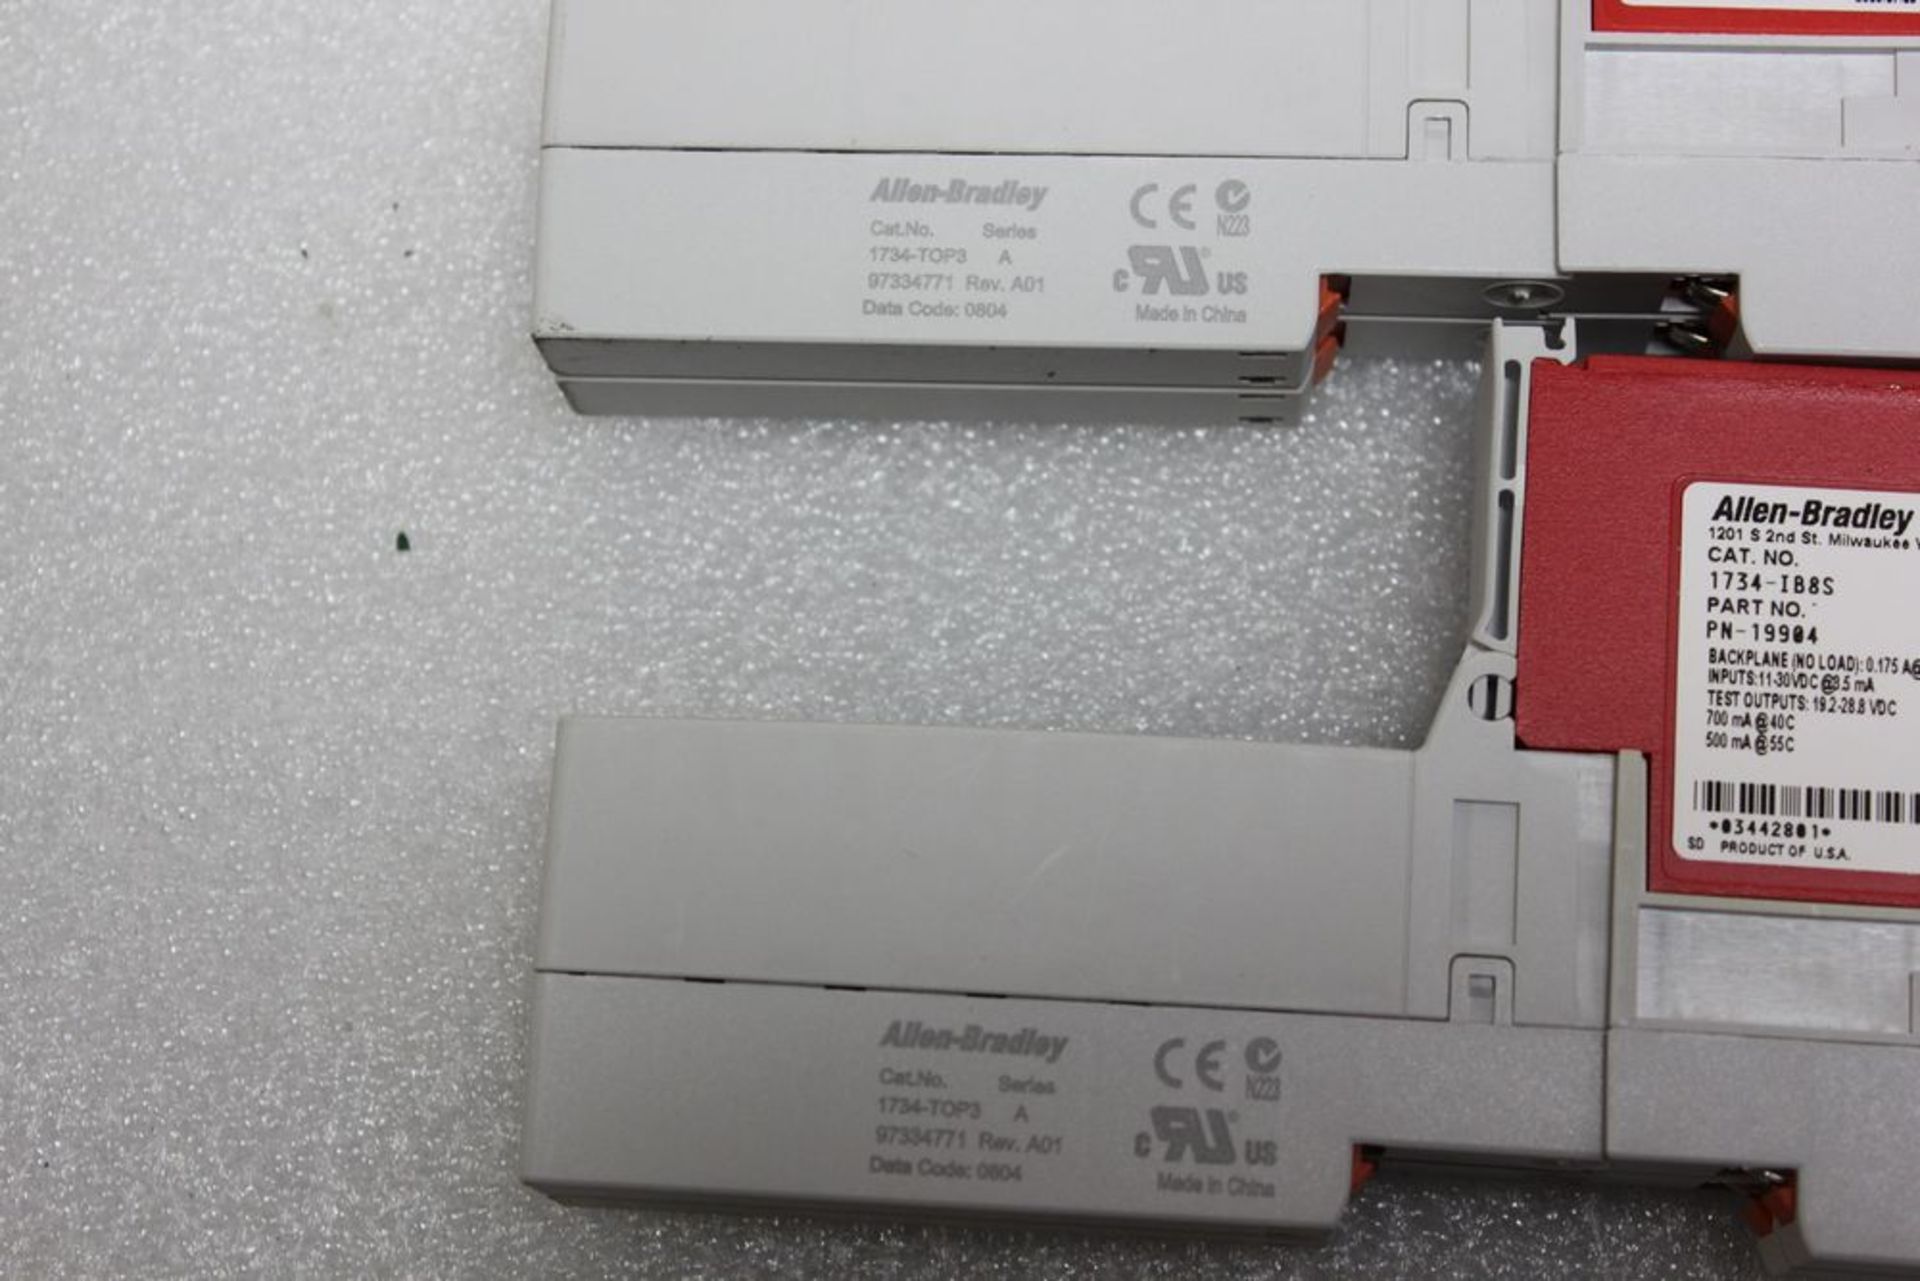 LOT OF ALLEN BRADLEY POINT I/O MODULES WITH CARRIERS - Image 4 of 4